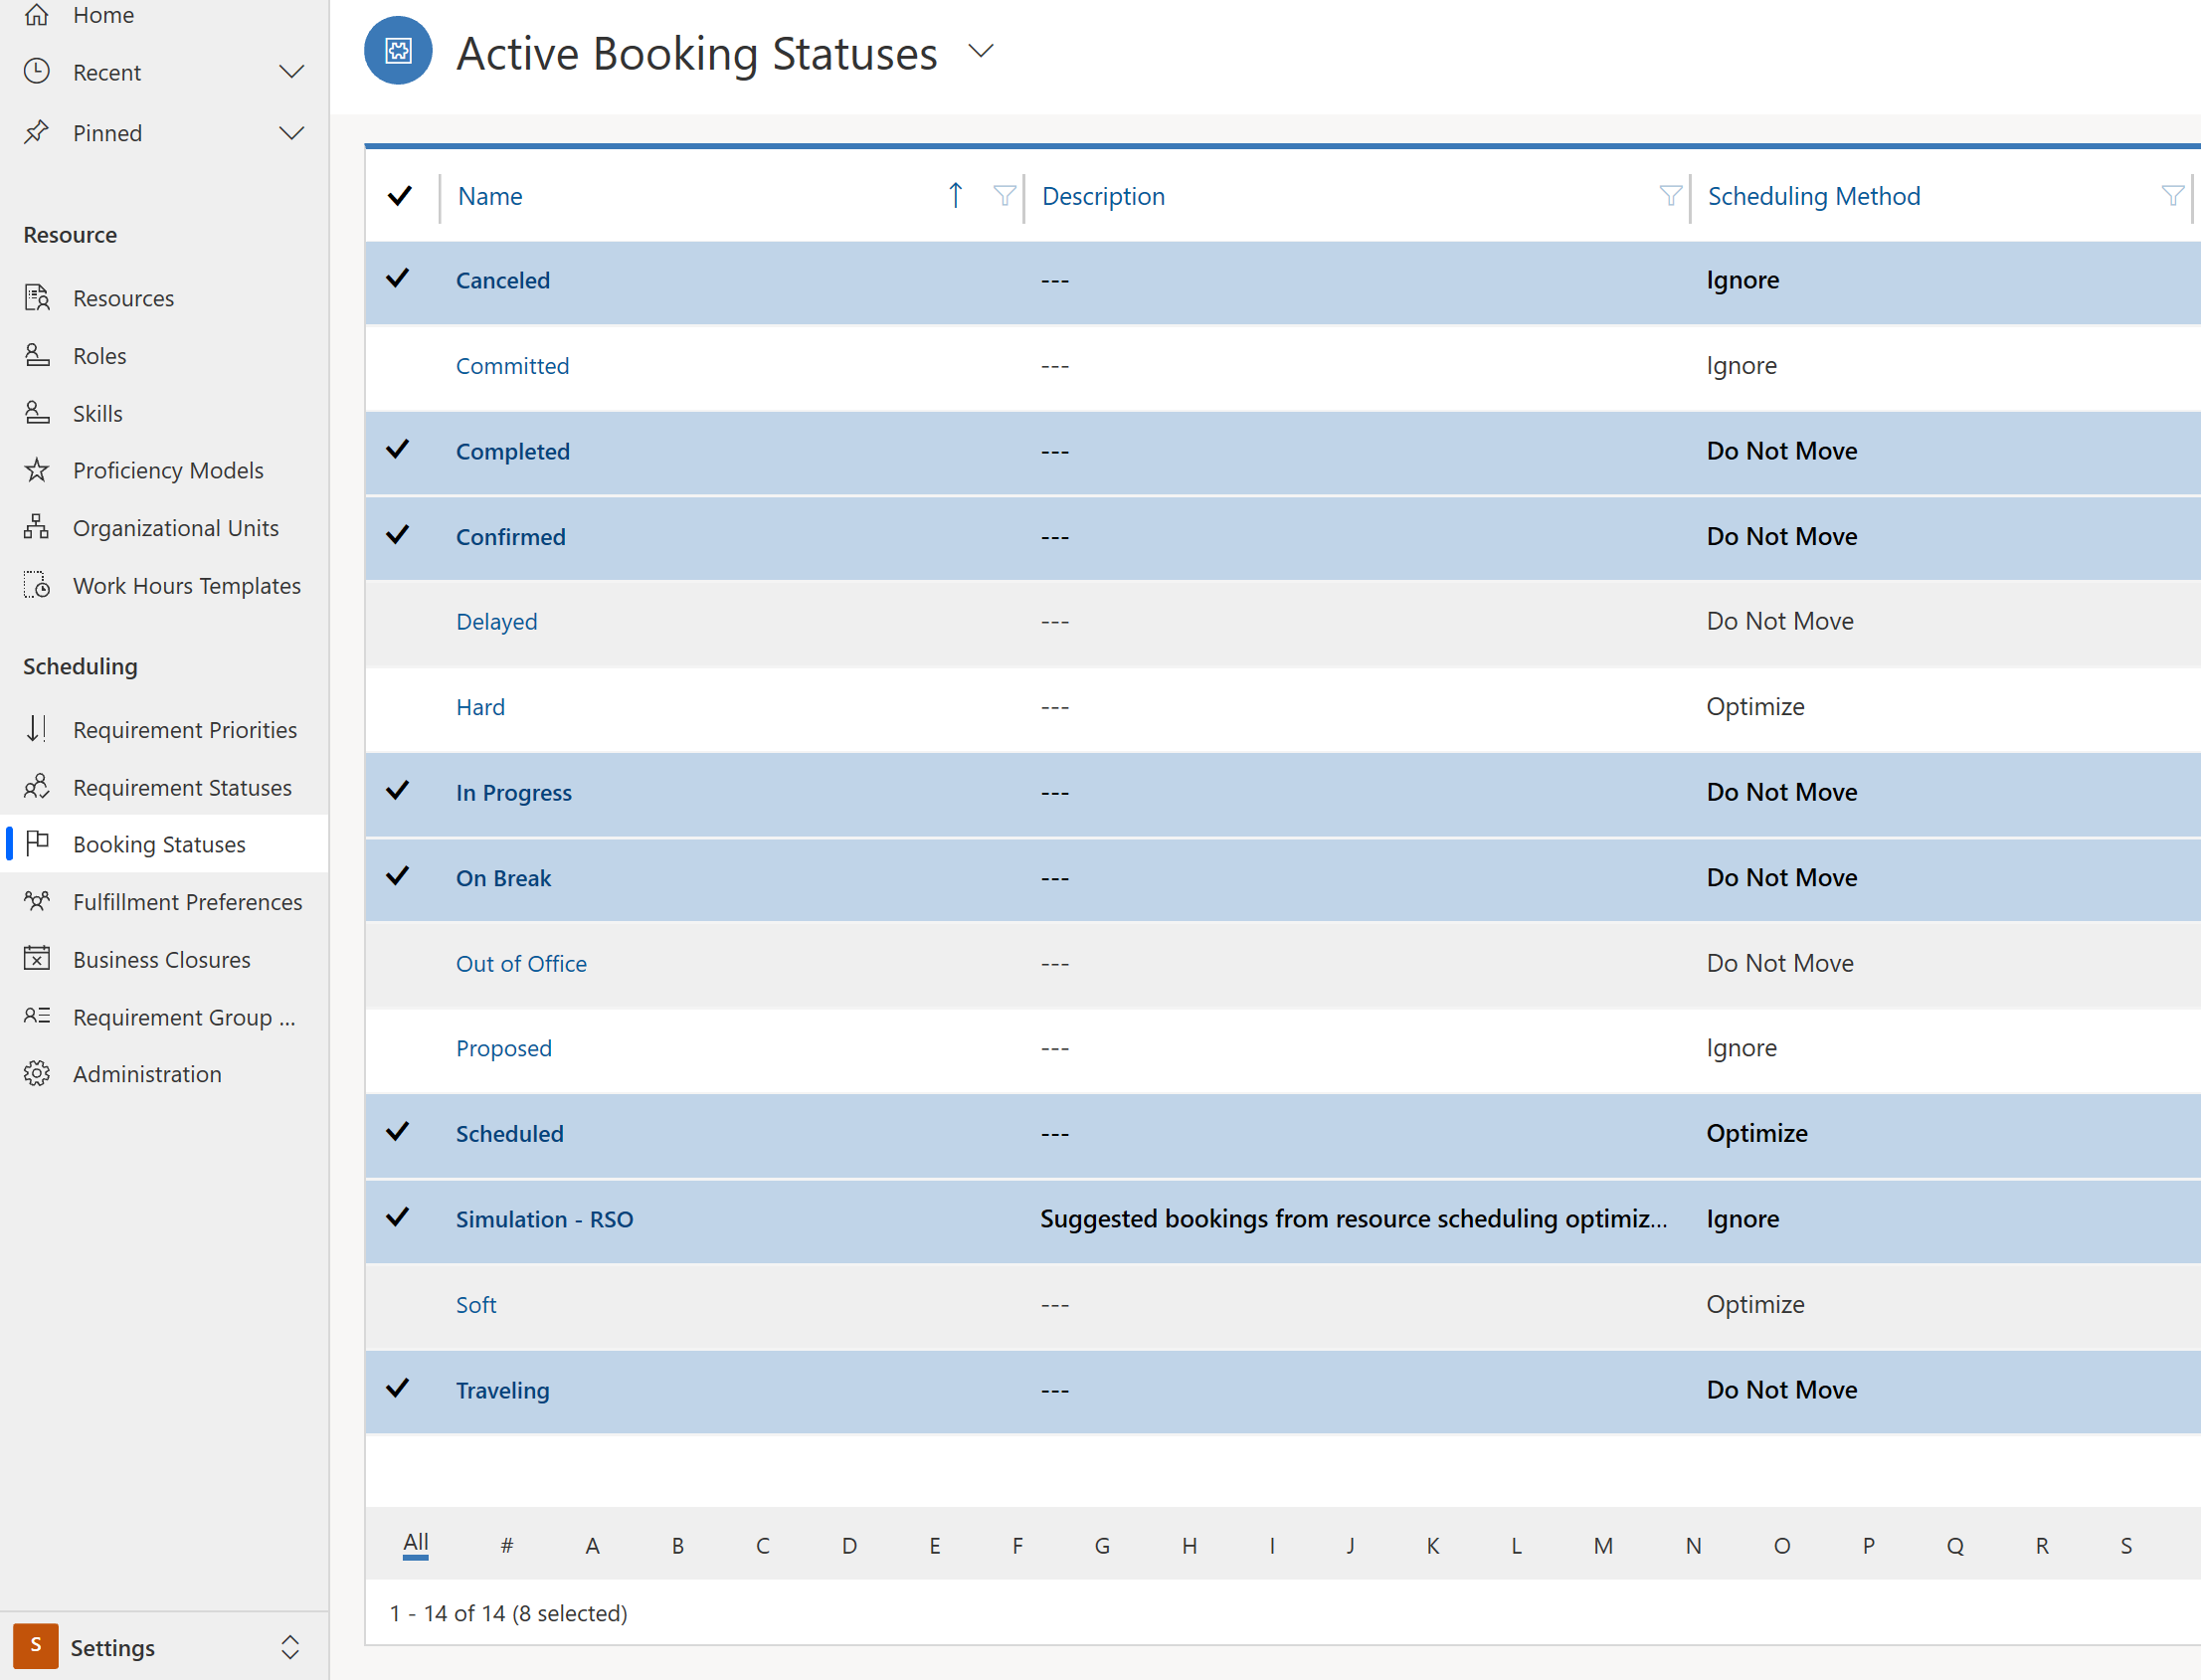 Screenshot of a list of booking statuses mapped to Resource Scheduling Optimization statuses.